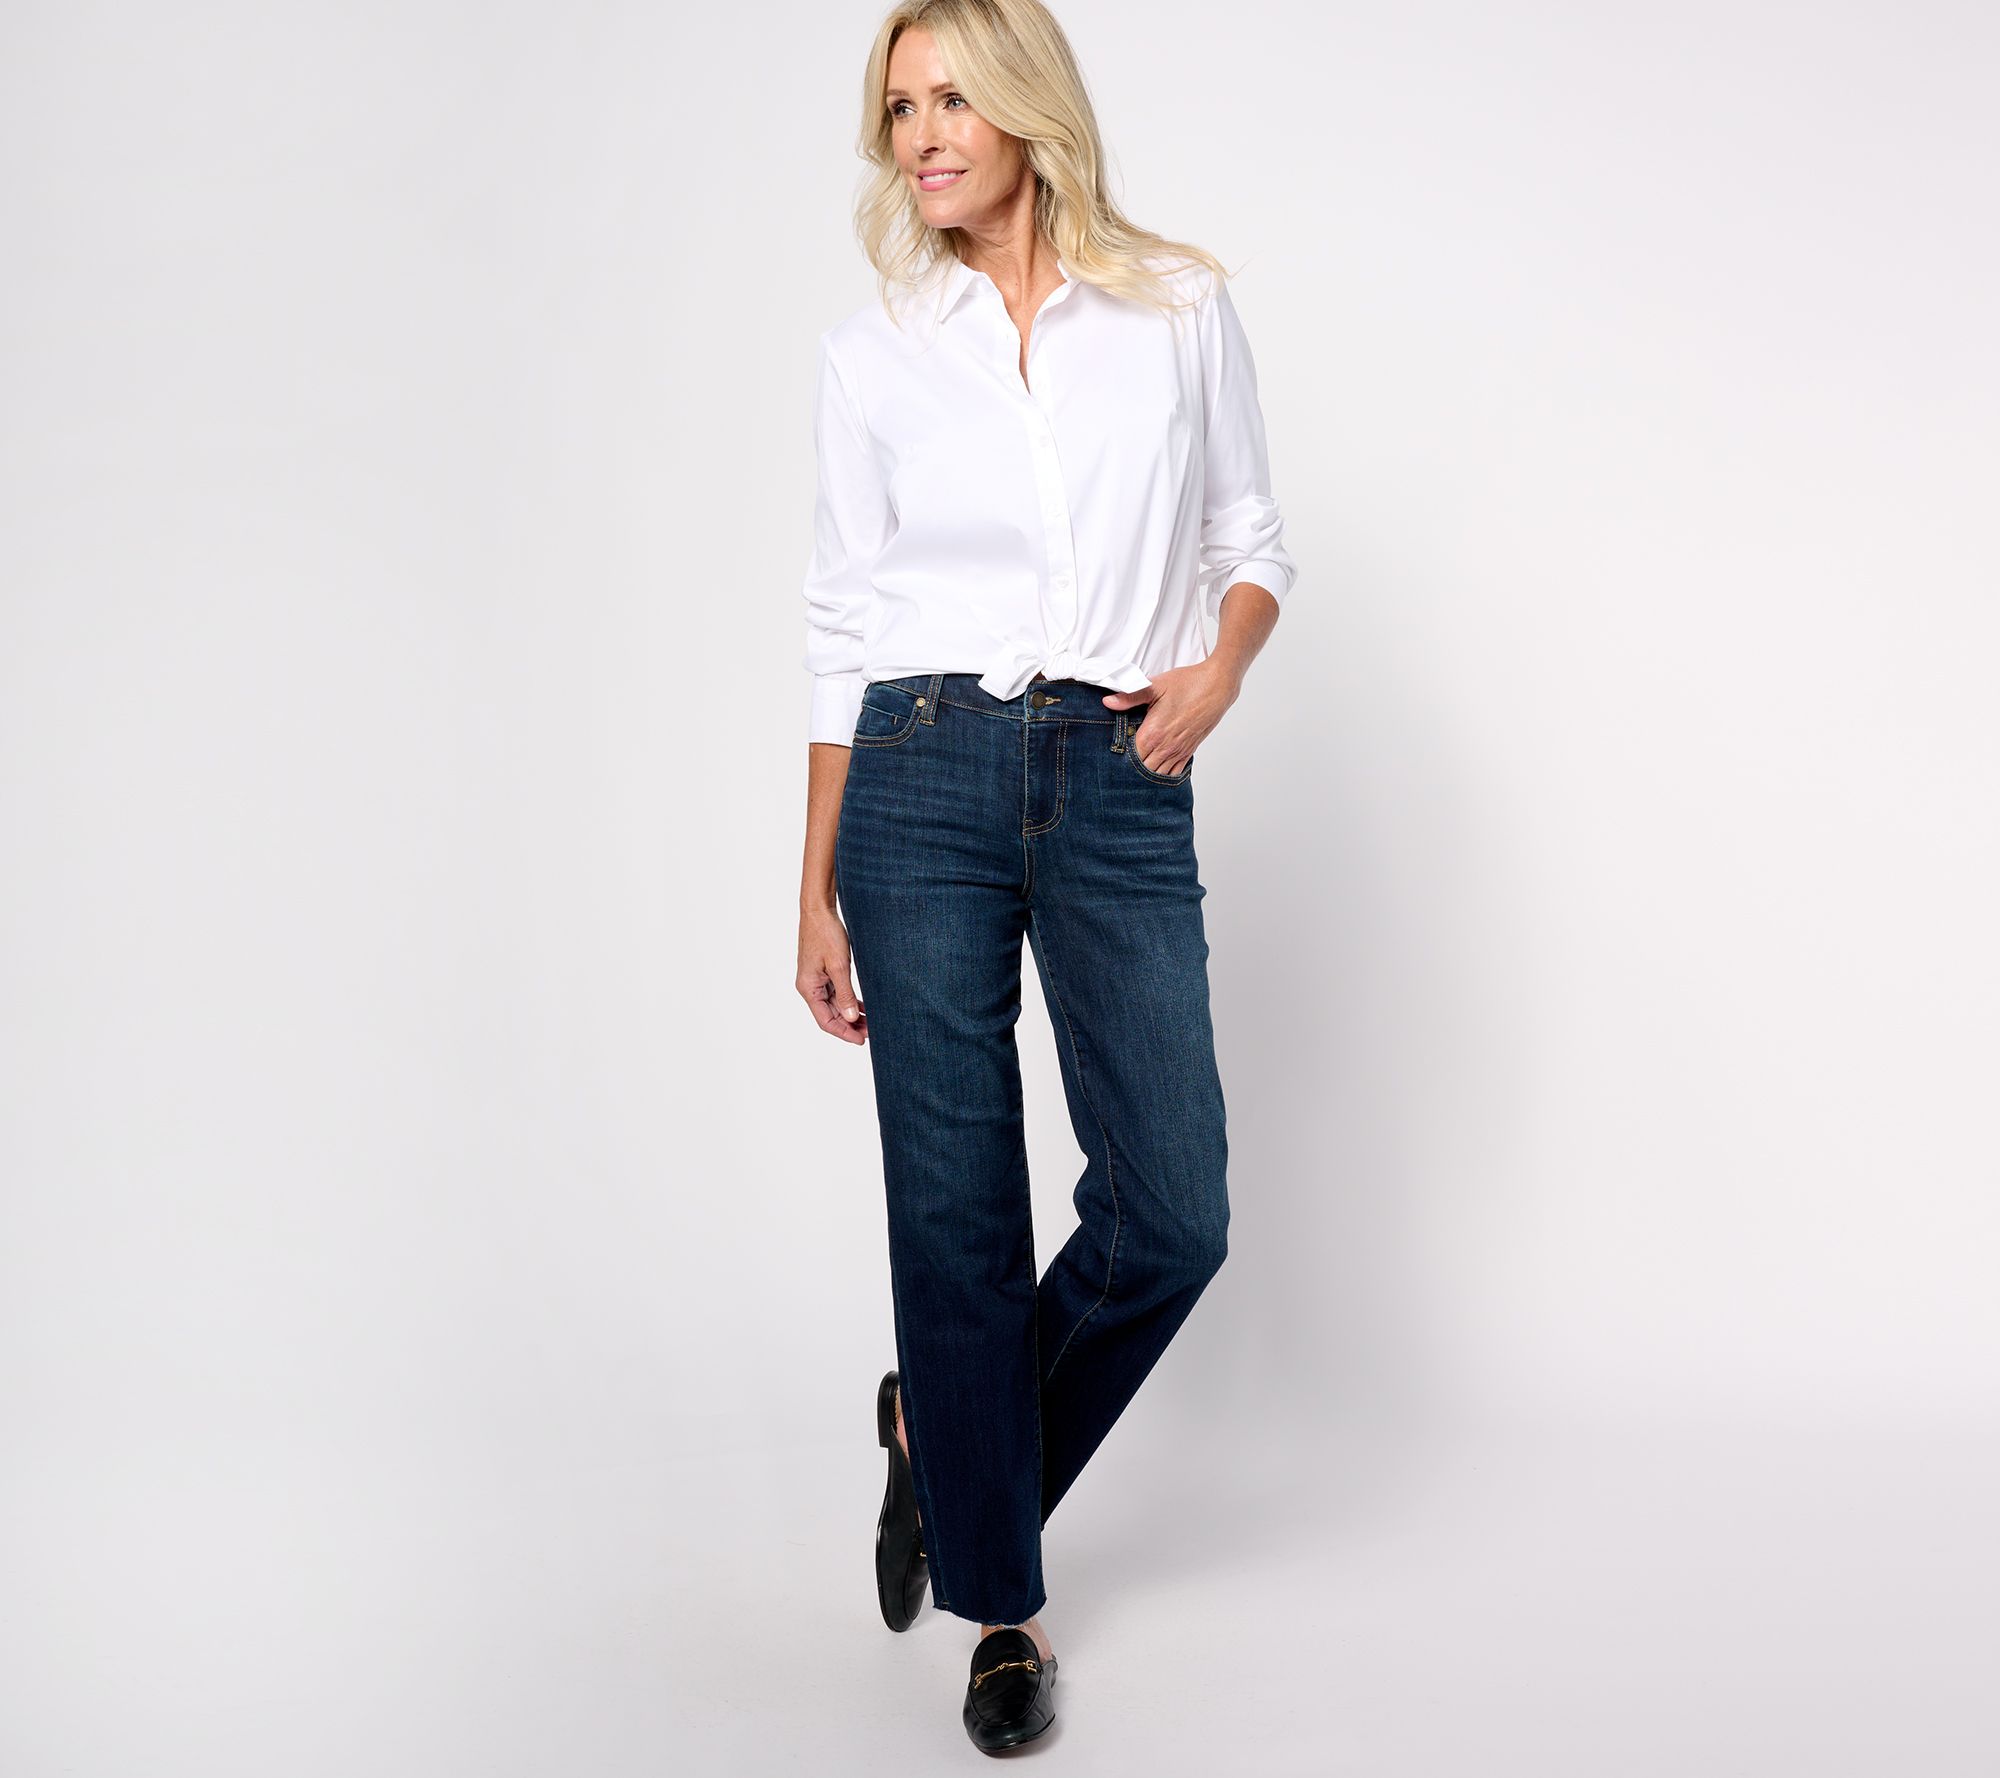 Liverpool Kennedy Straight with Fray Hem Jean - Clover - QVC.com